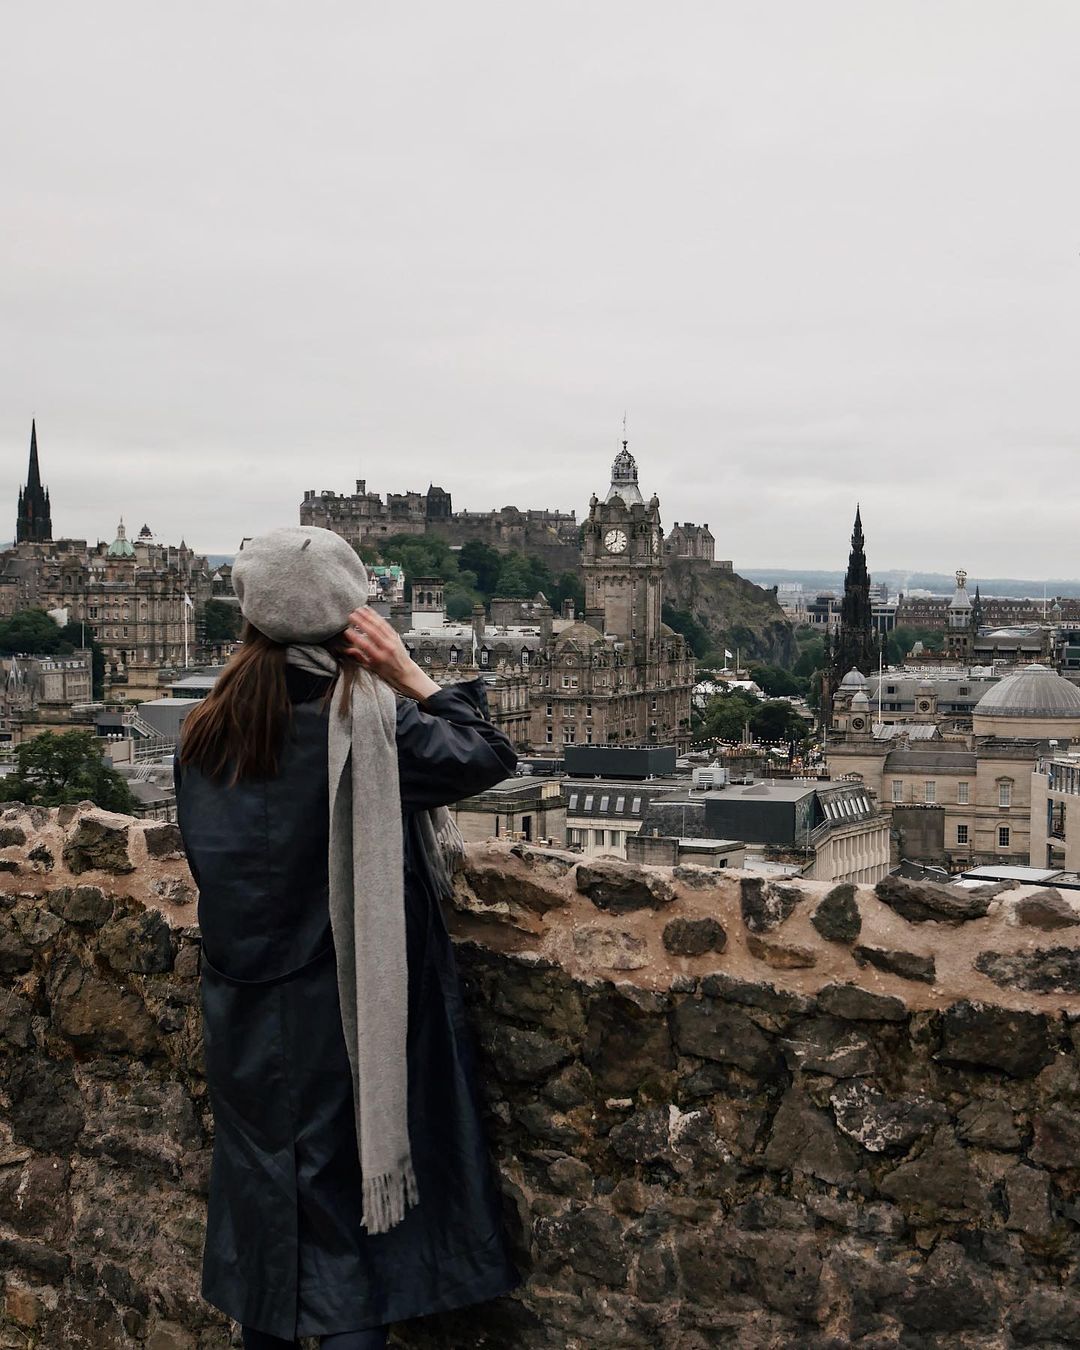 Walking (and rediscovering) Edinburgh with The Edinburgh Enthusiast